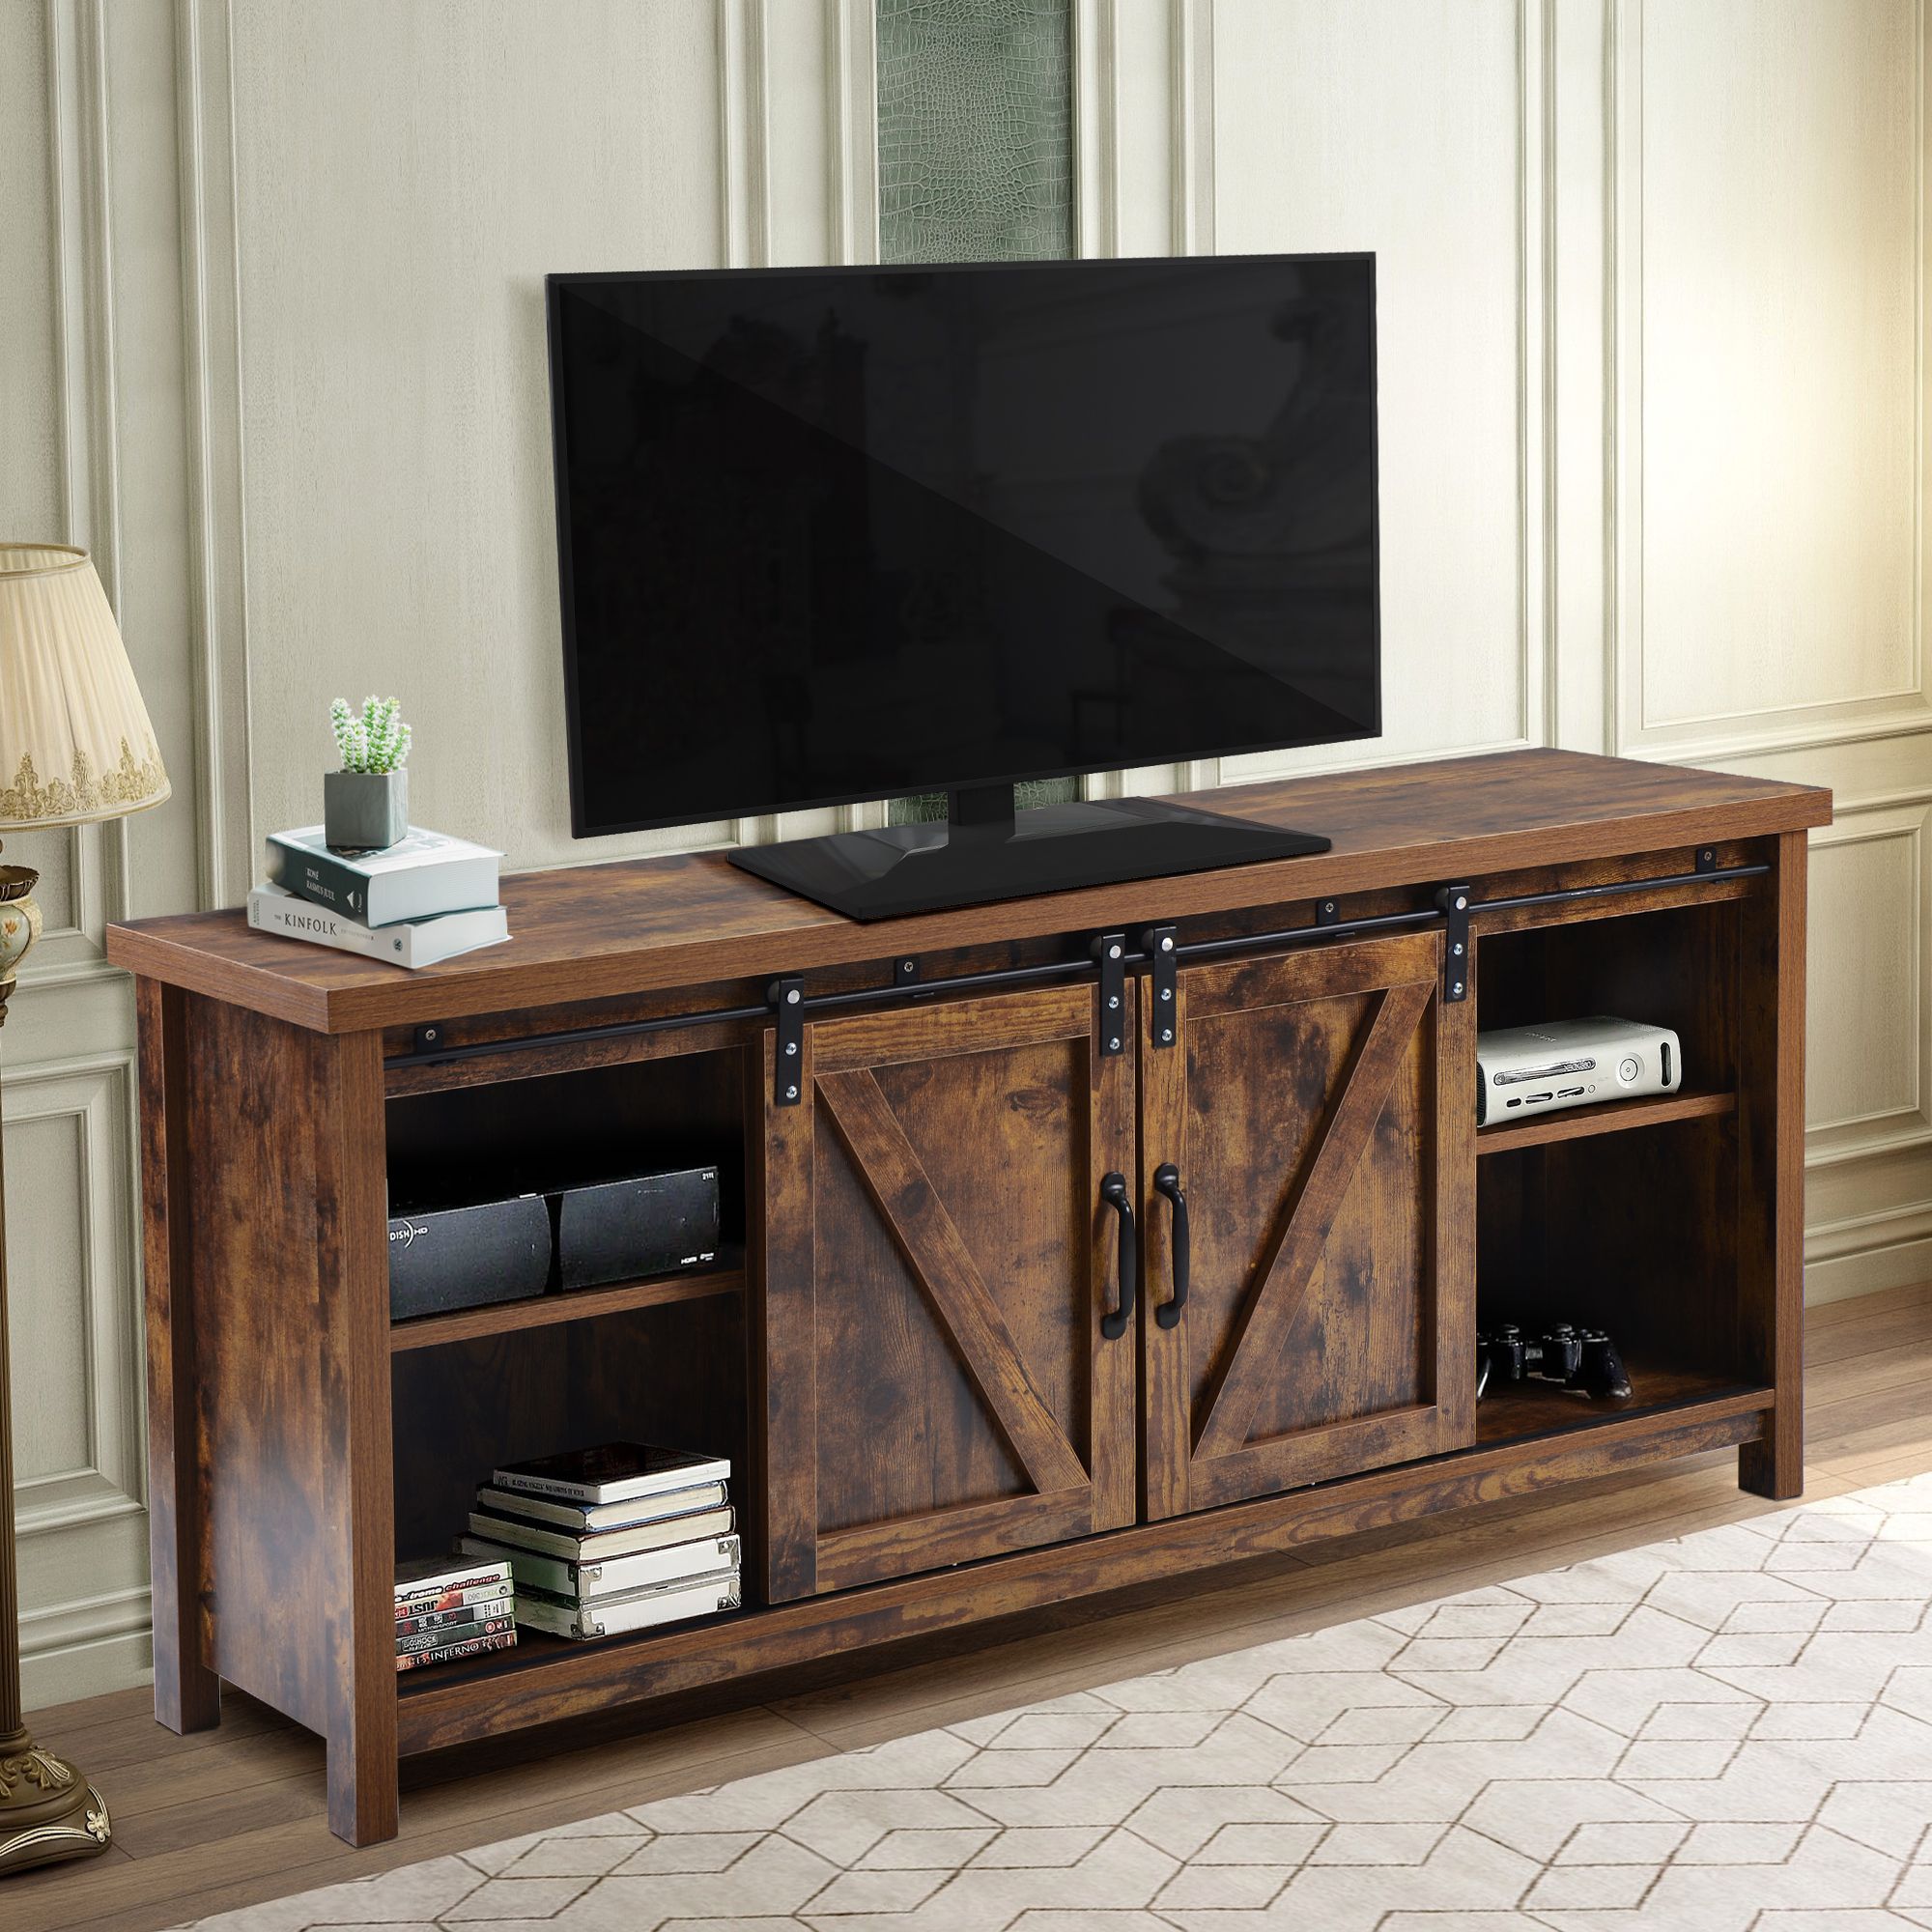 Universal Tv Stand, Modern Wood Tv Stands, Tv Stand For For Modern 2 Glass Door Corner Tv Stands (View 1 of 15)